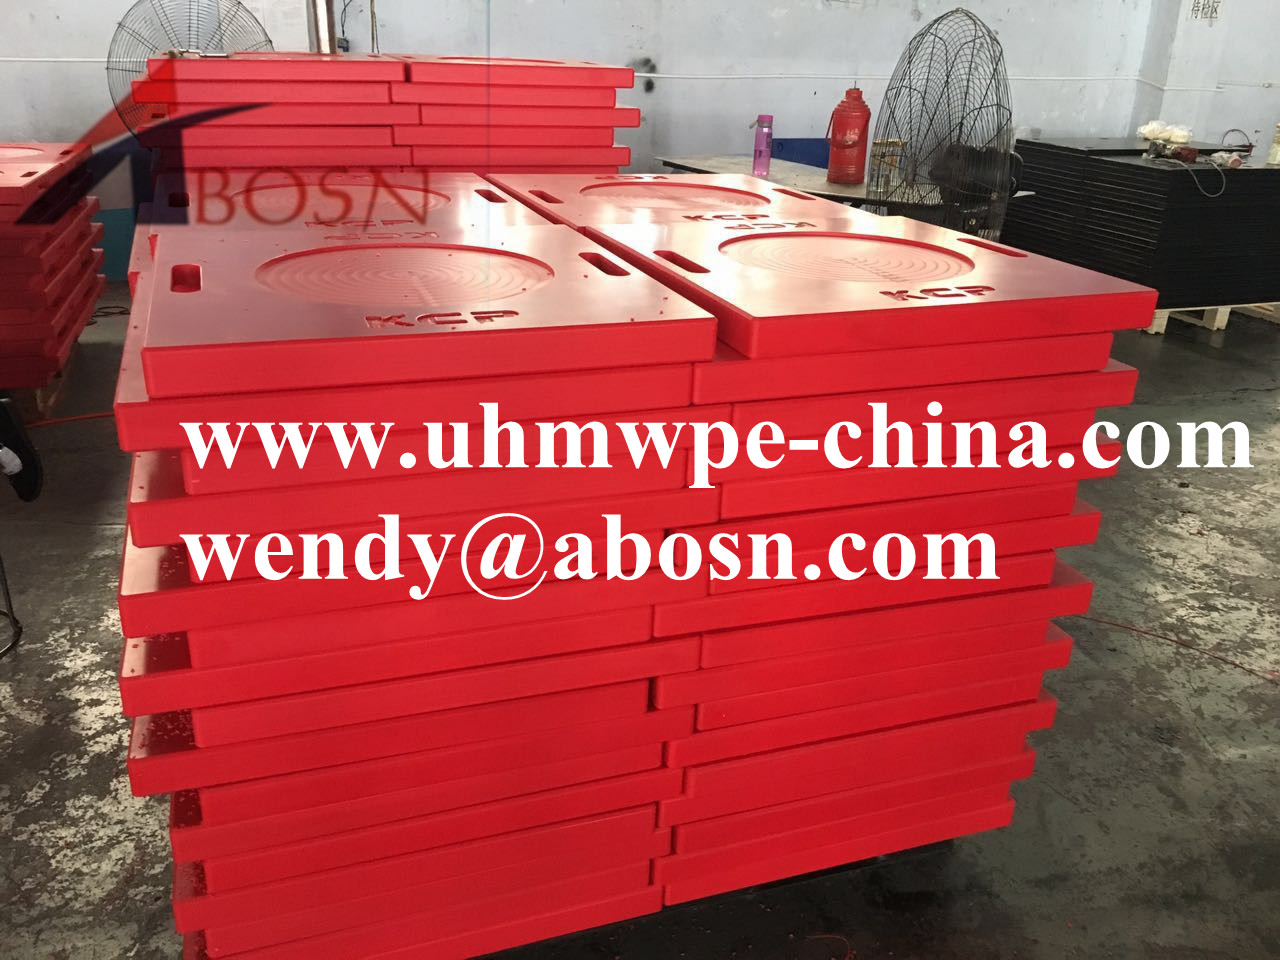 Heavy Duty Crane Outrigger Pad in Construction Site_UHMWPE Crane ...